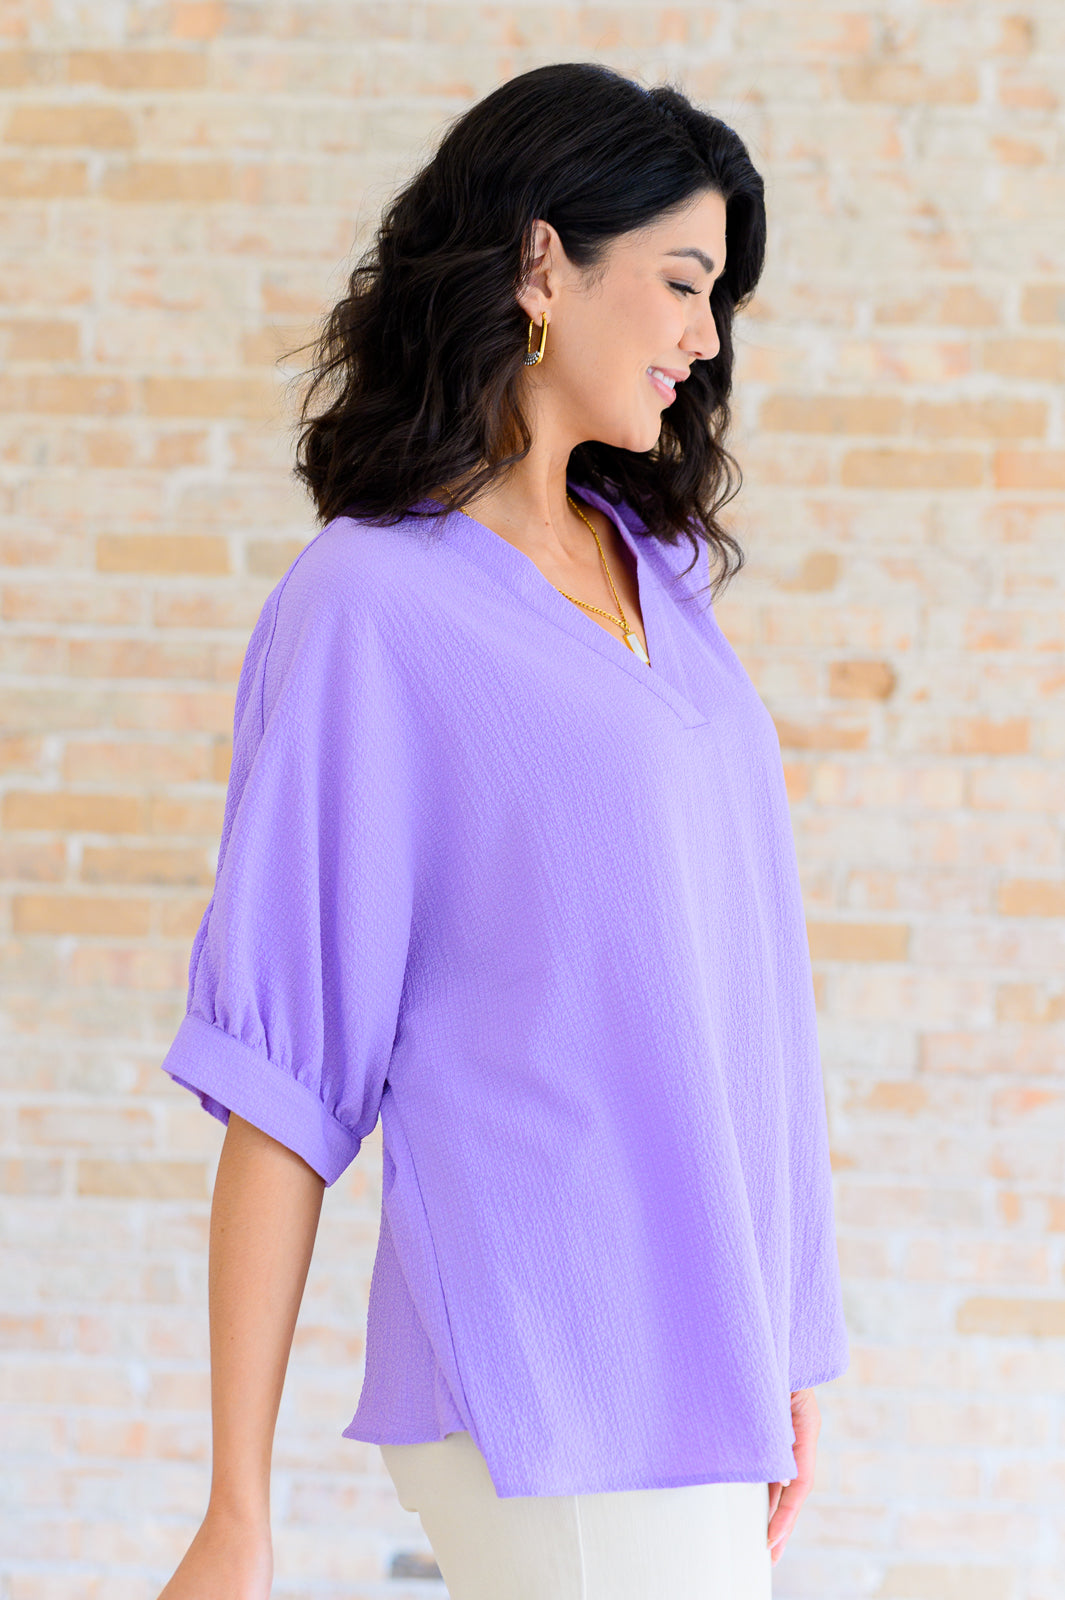 Up For Anything V-Neck Blouse in Lavender-Short Sleeves-Ave Shops-Urban Threadz Boutique, Women's Fashion Boutique in Saugatuck, MI